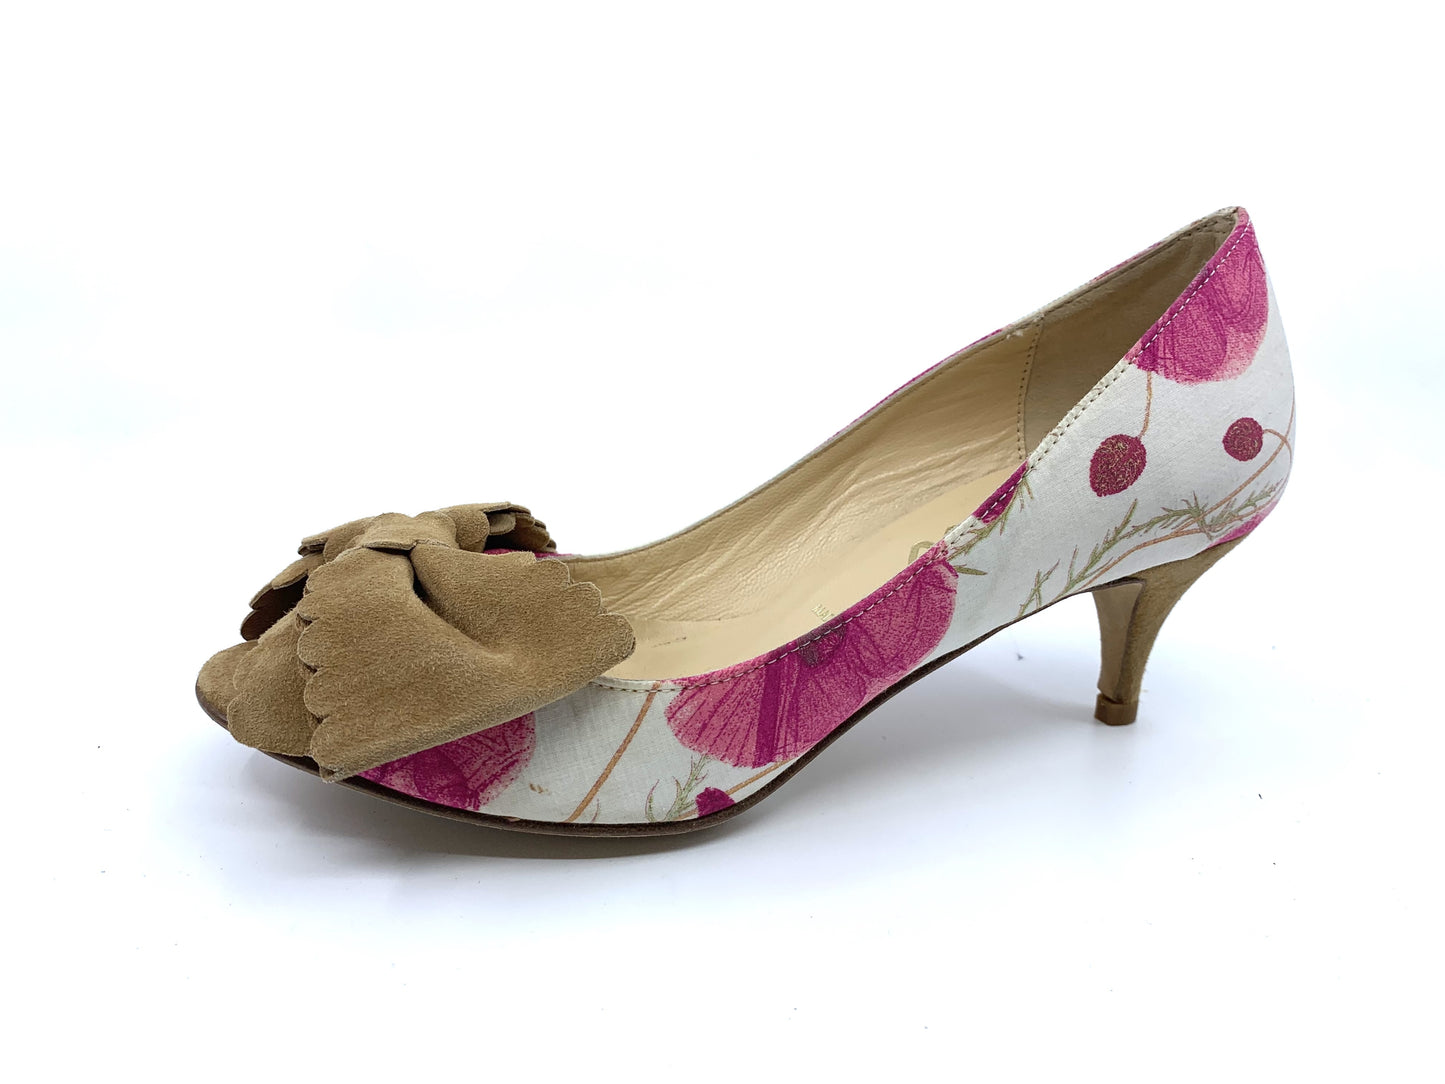 Starla Red Poppy Fabric Tan Suede Butter Pumps